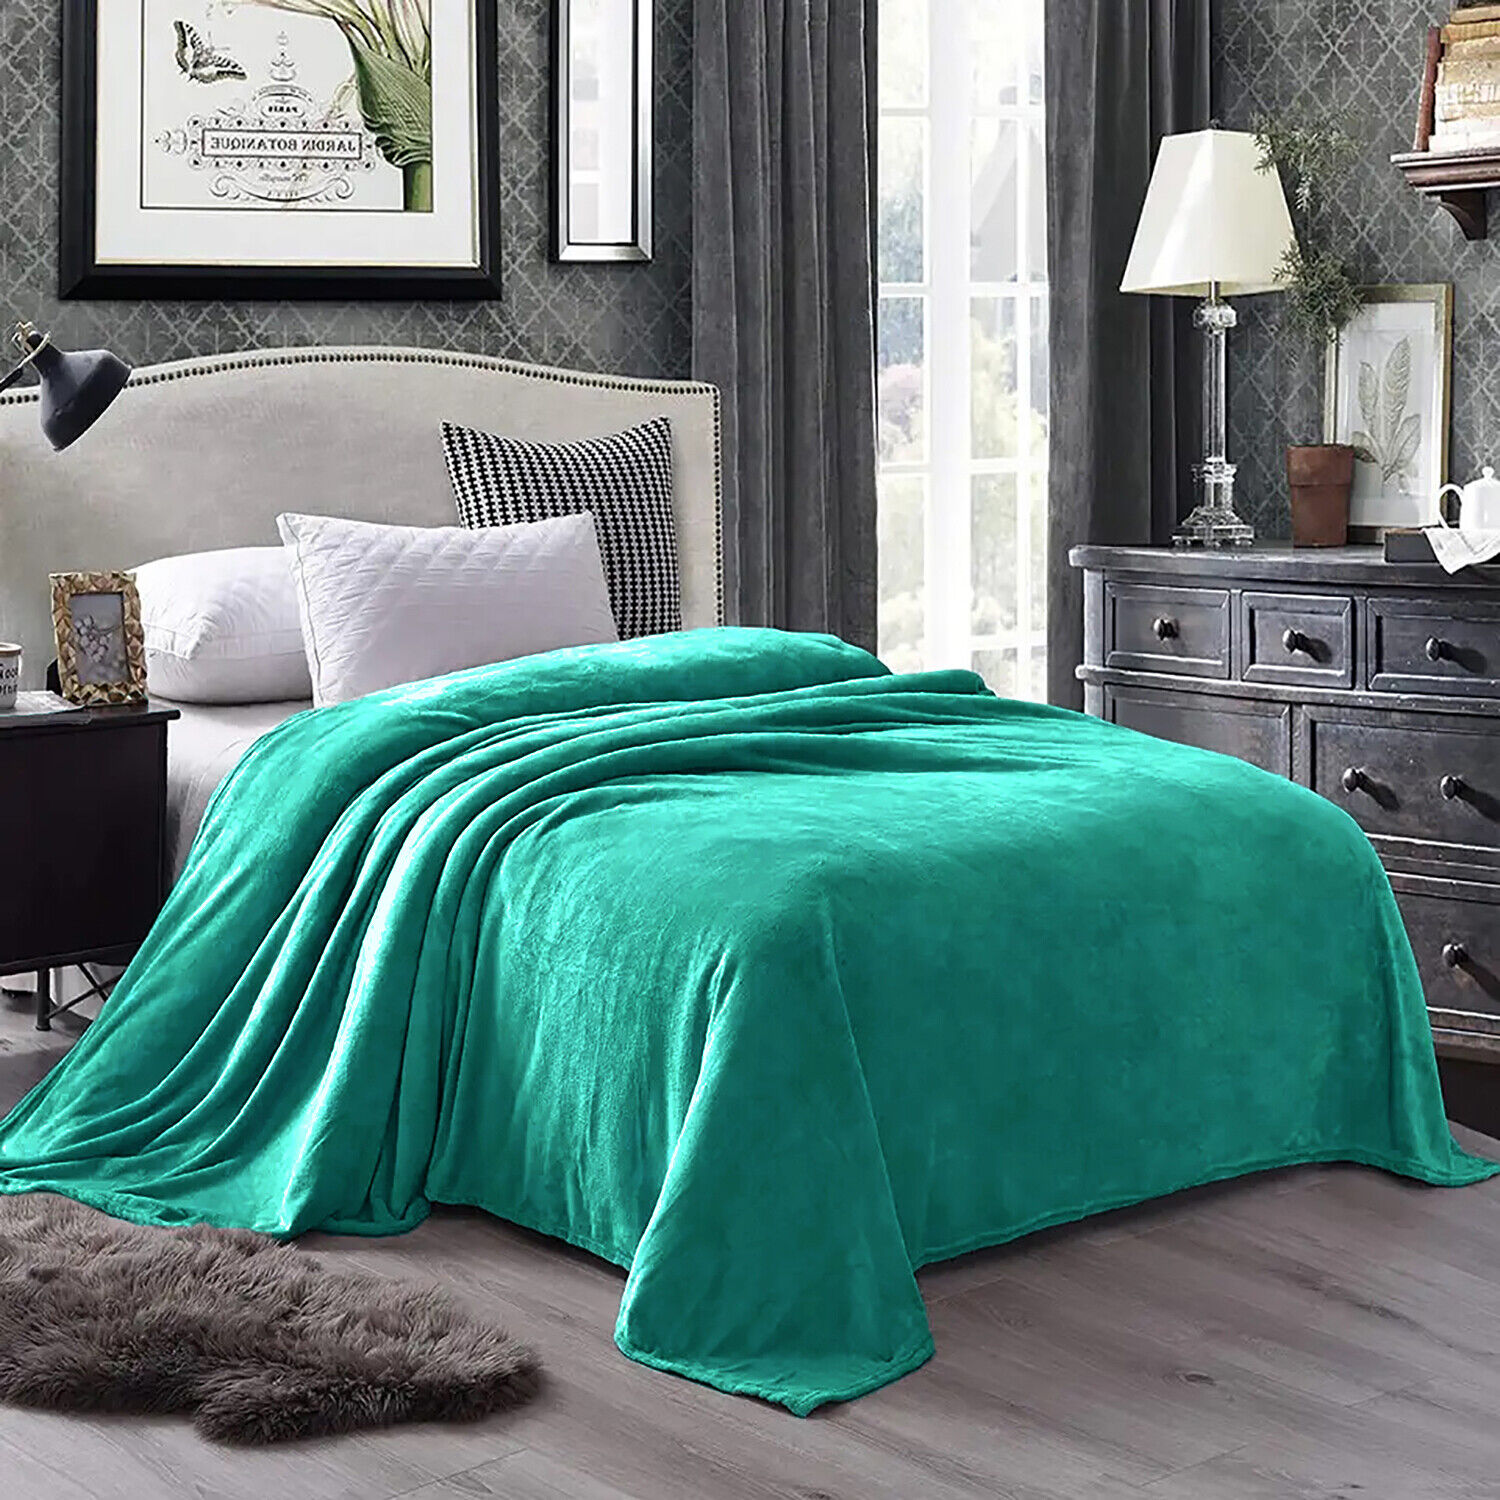 Home Mart Goods Turquoise King Flannel Throw Plush Cozy Super Soft Cozy Warm Bed Blanket